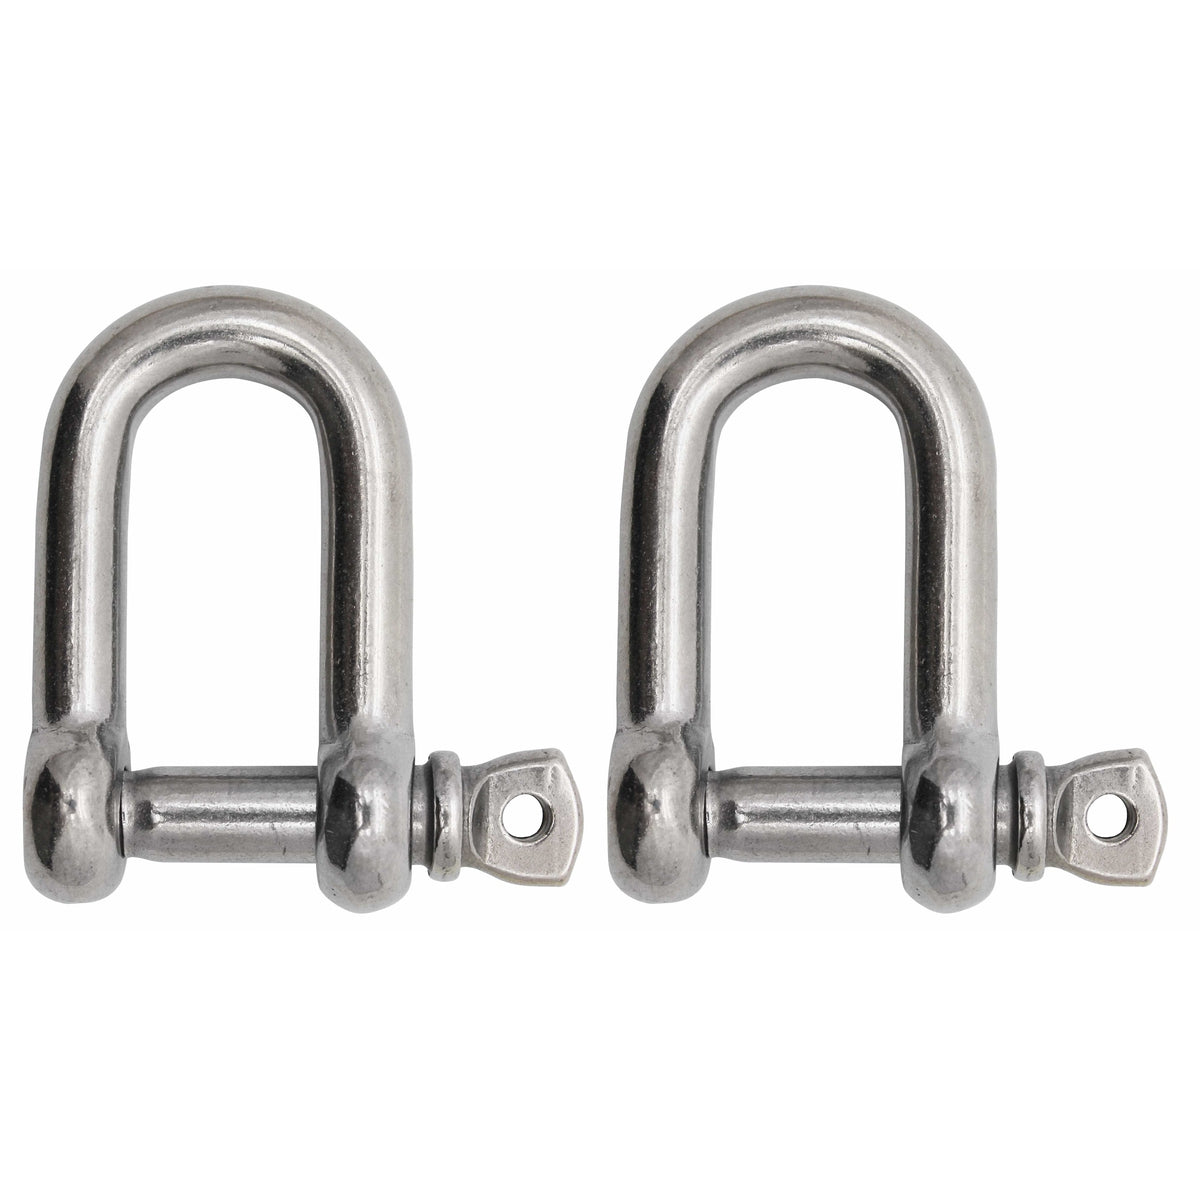 Extreme Max BoatTector SS D Shackle 7/8" 2-pk #3006.8255.2